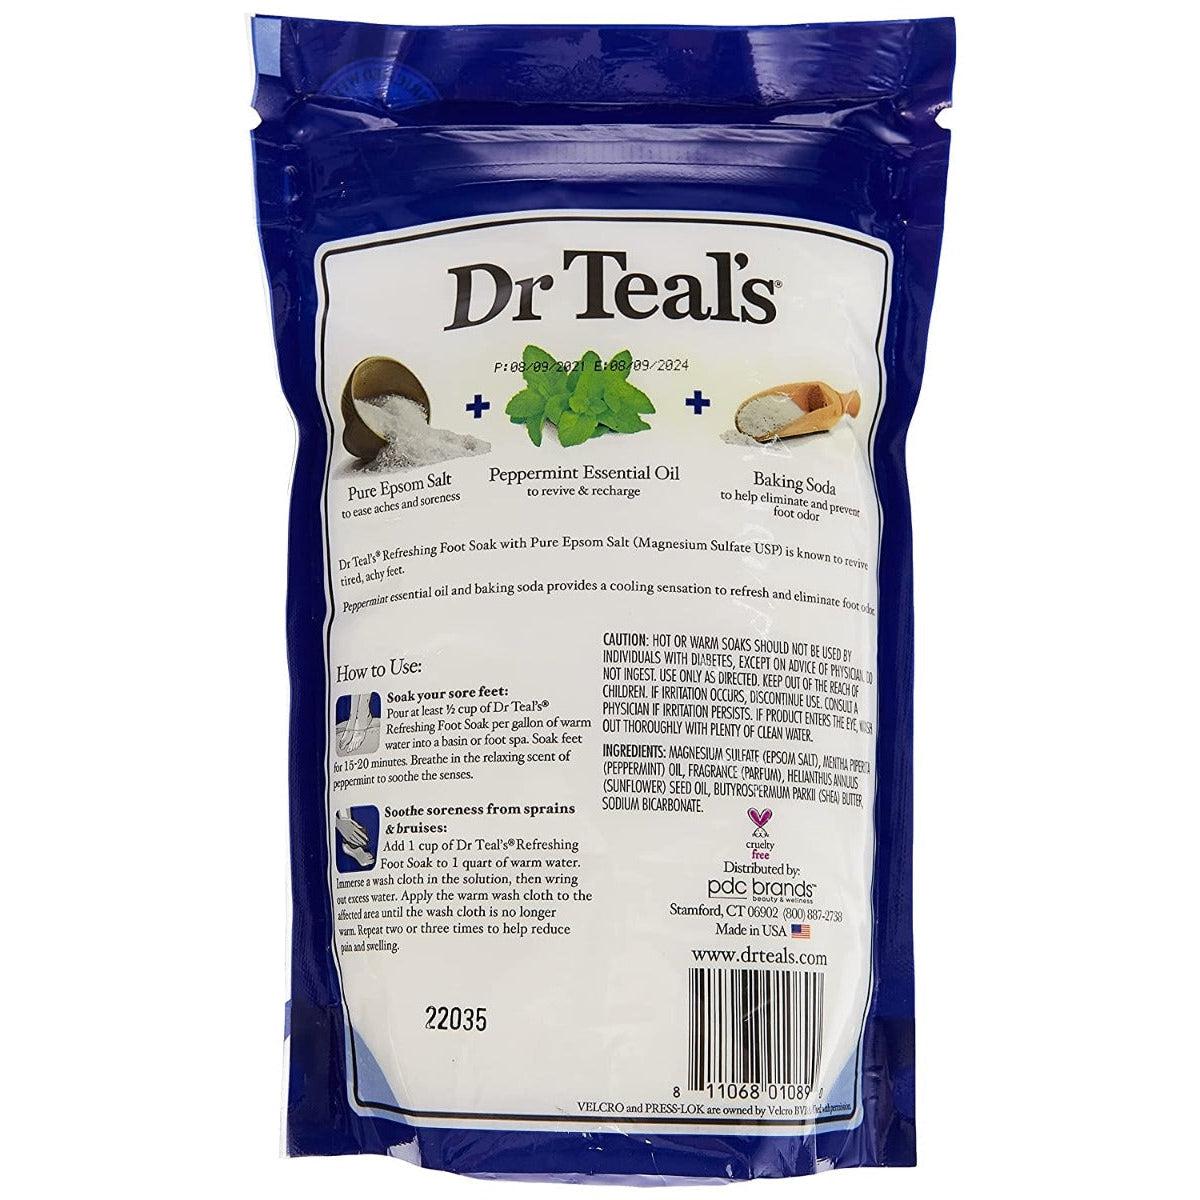 Dr. Teal's Foot Care Therapy Pure Epsom Salt Cooling Peppermint With Shea Butter 909g